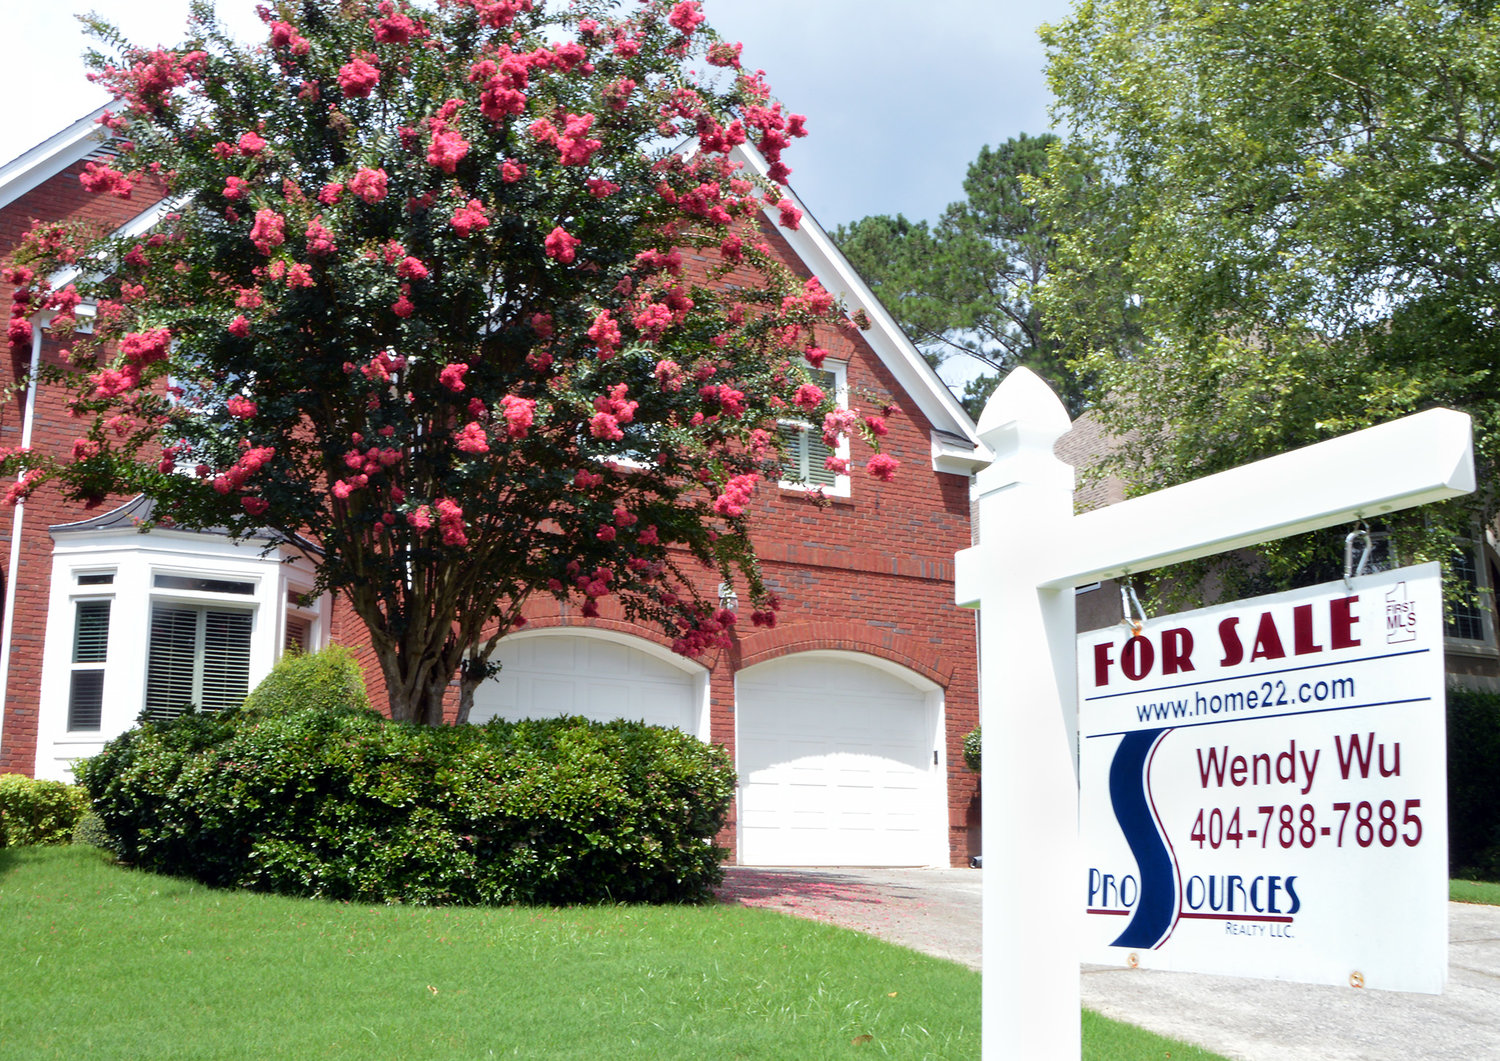 A "For Sale" sign stands in front of a home in Marietta, Ga., July 20, 2022. (Christian Index/Henry Durand)